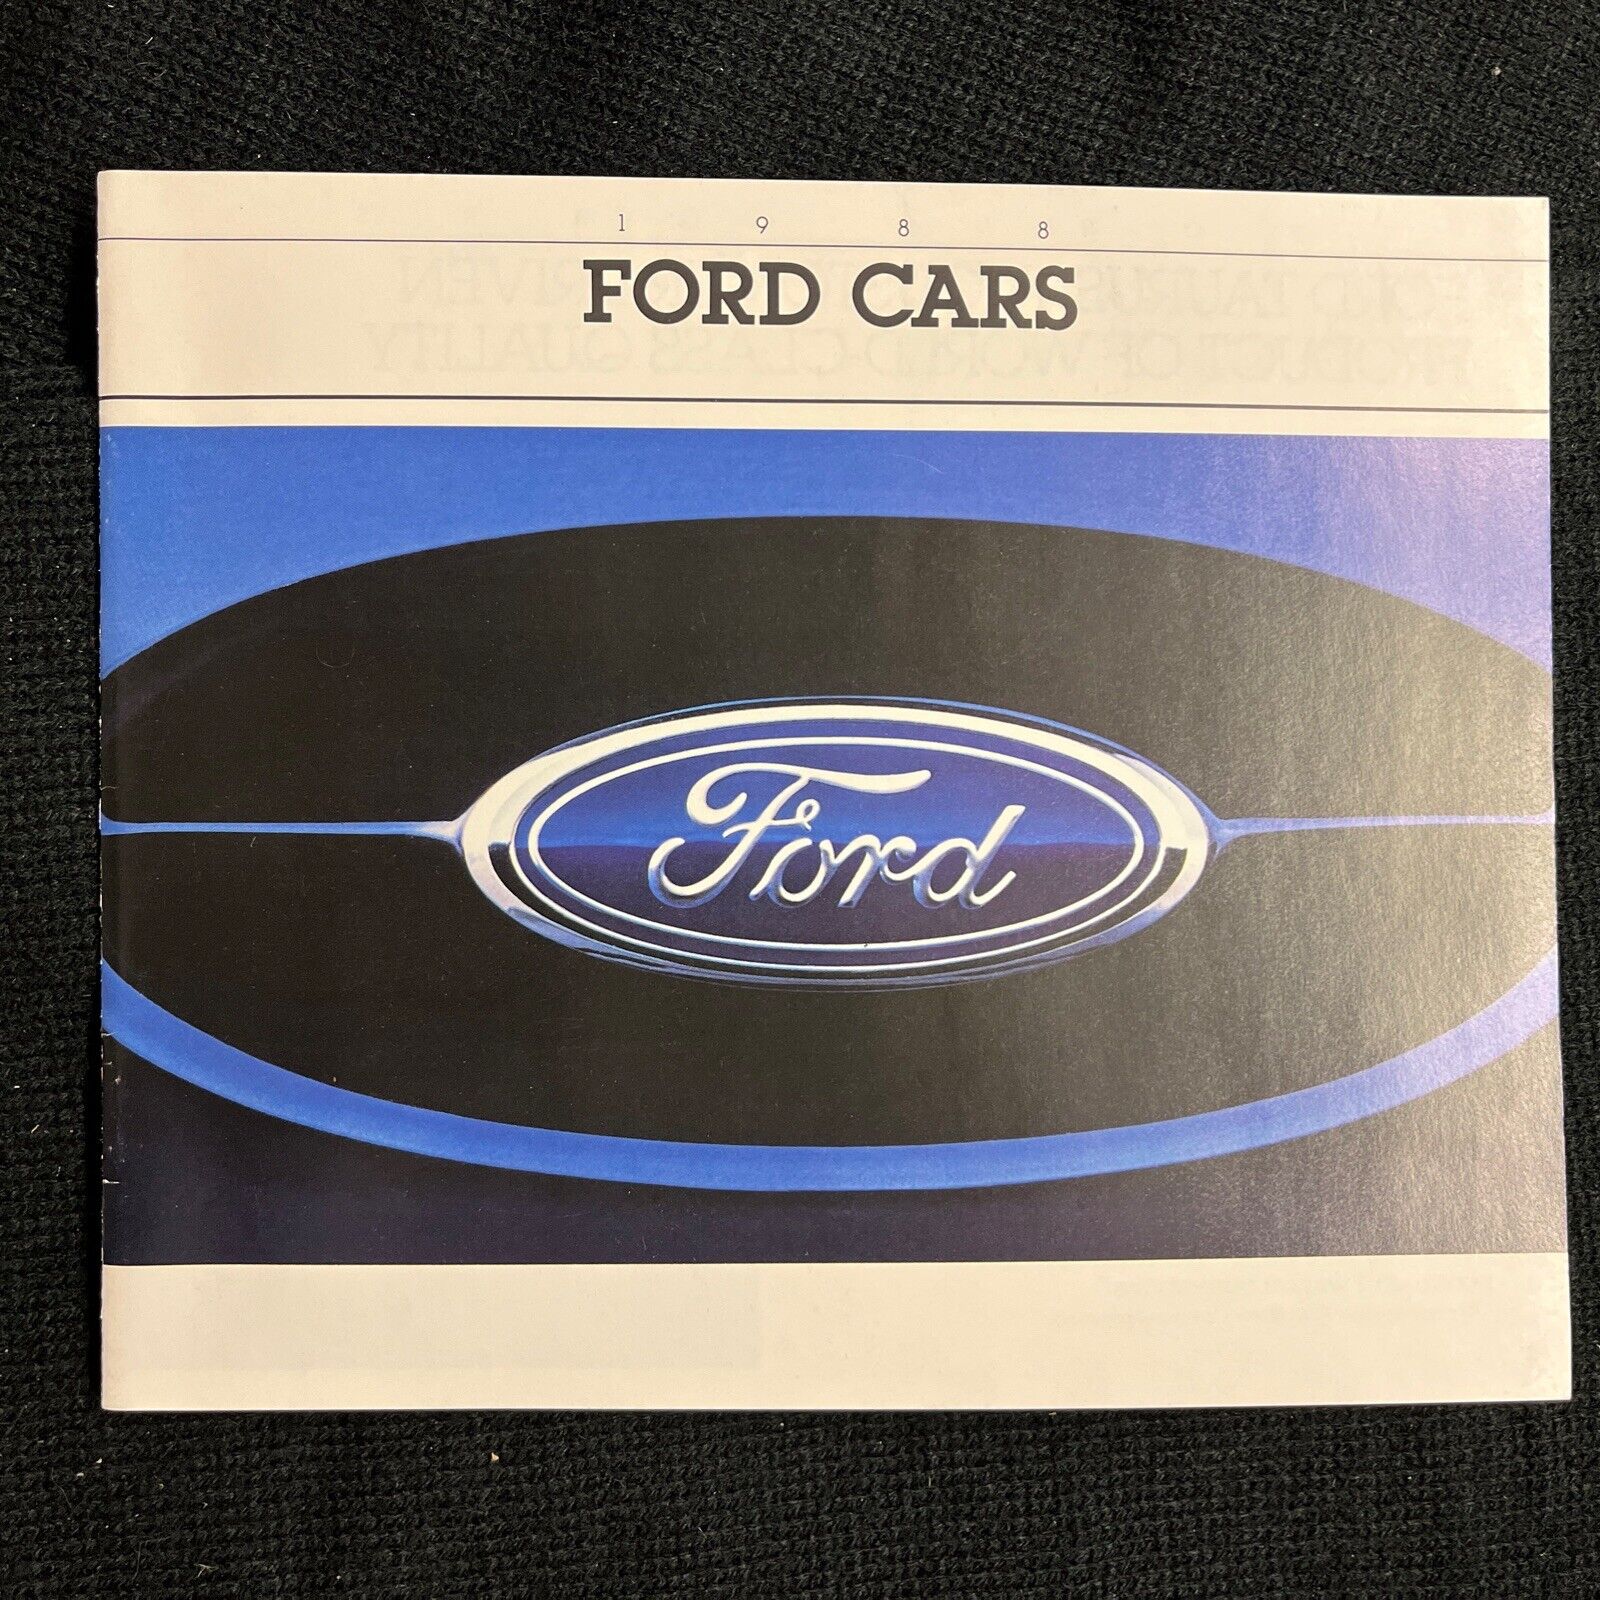 1988 FORD CATALOG 20 Pages FULL LINE FOX BODY MUSTANG THUNDERBIRD Automotive